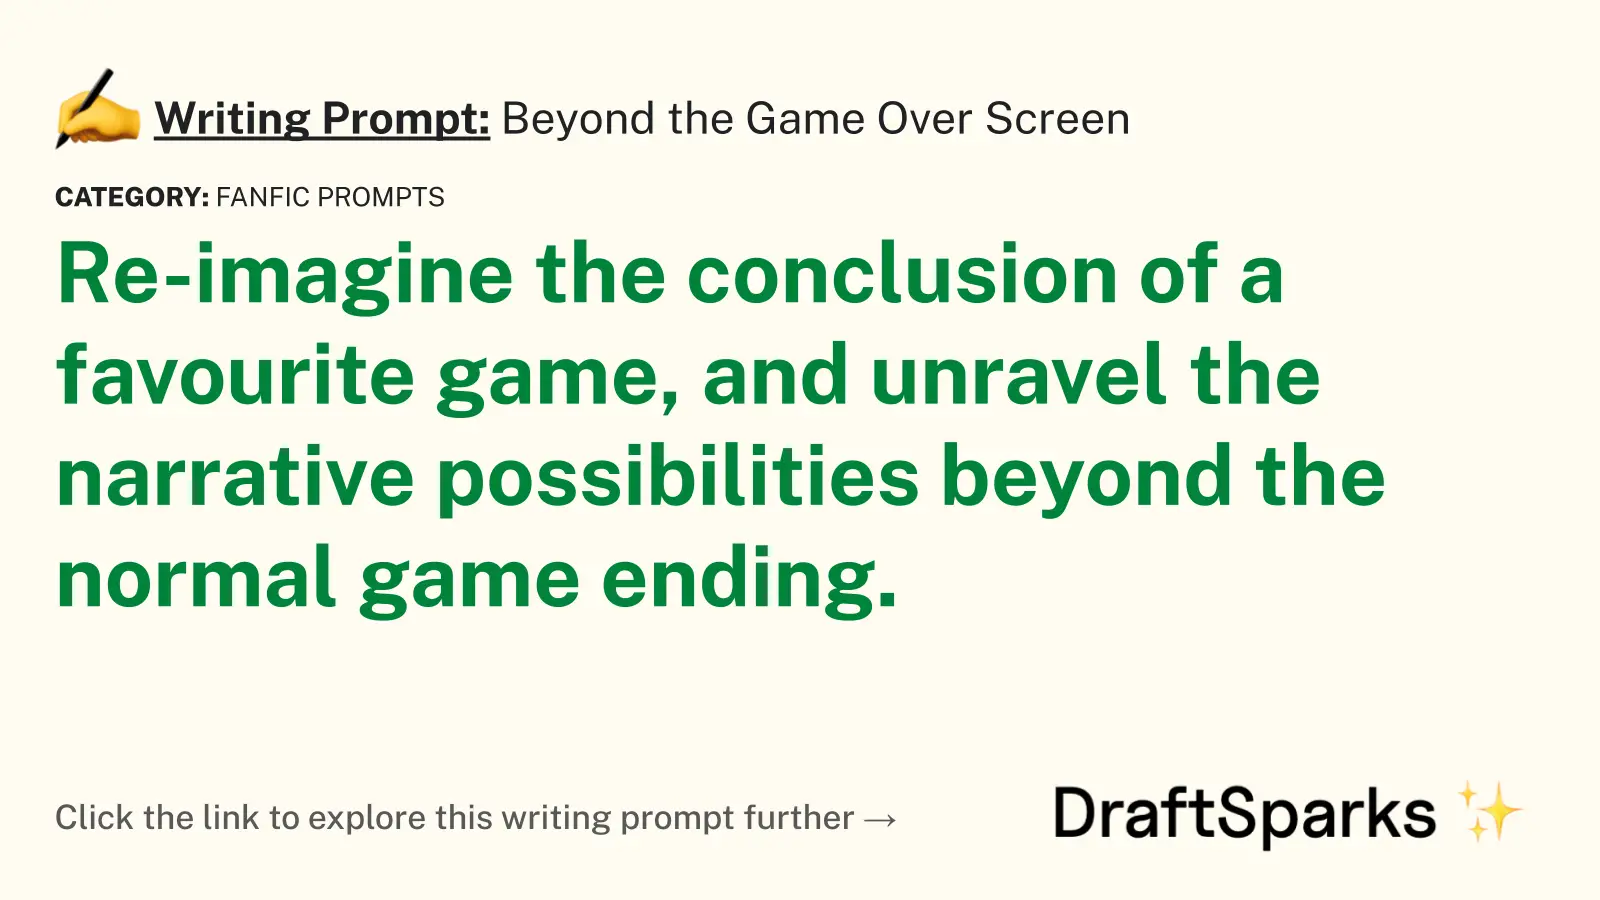 Beyond the Game Over Screen